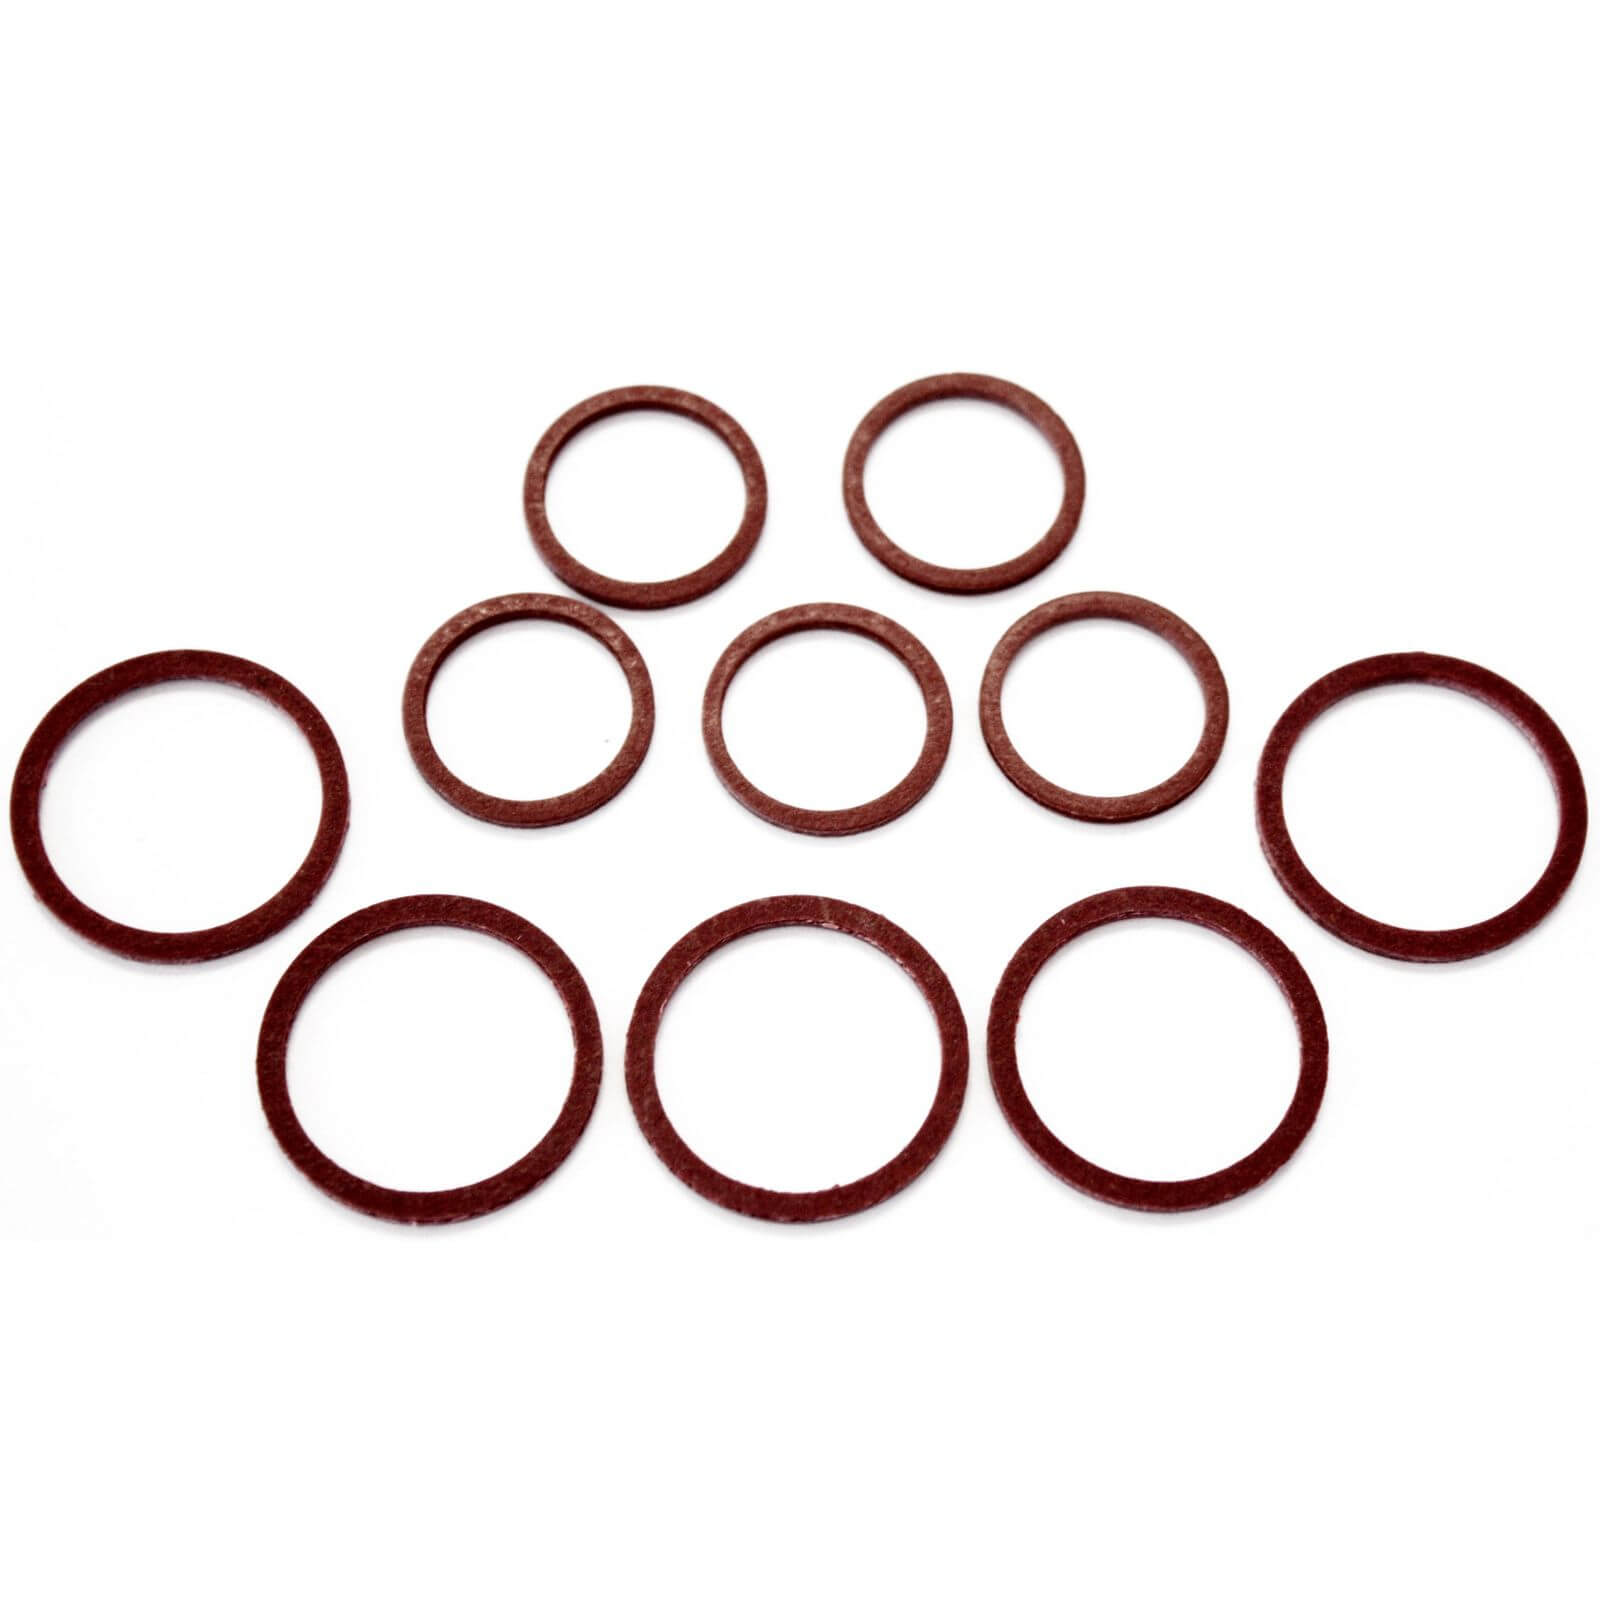 Oracstar Mixed Pack of Fibre Washers